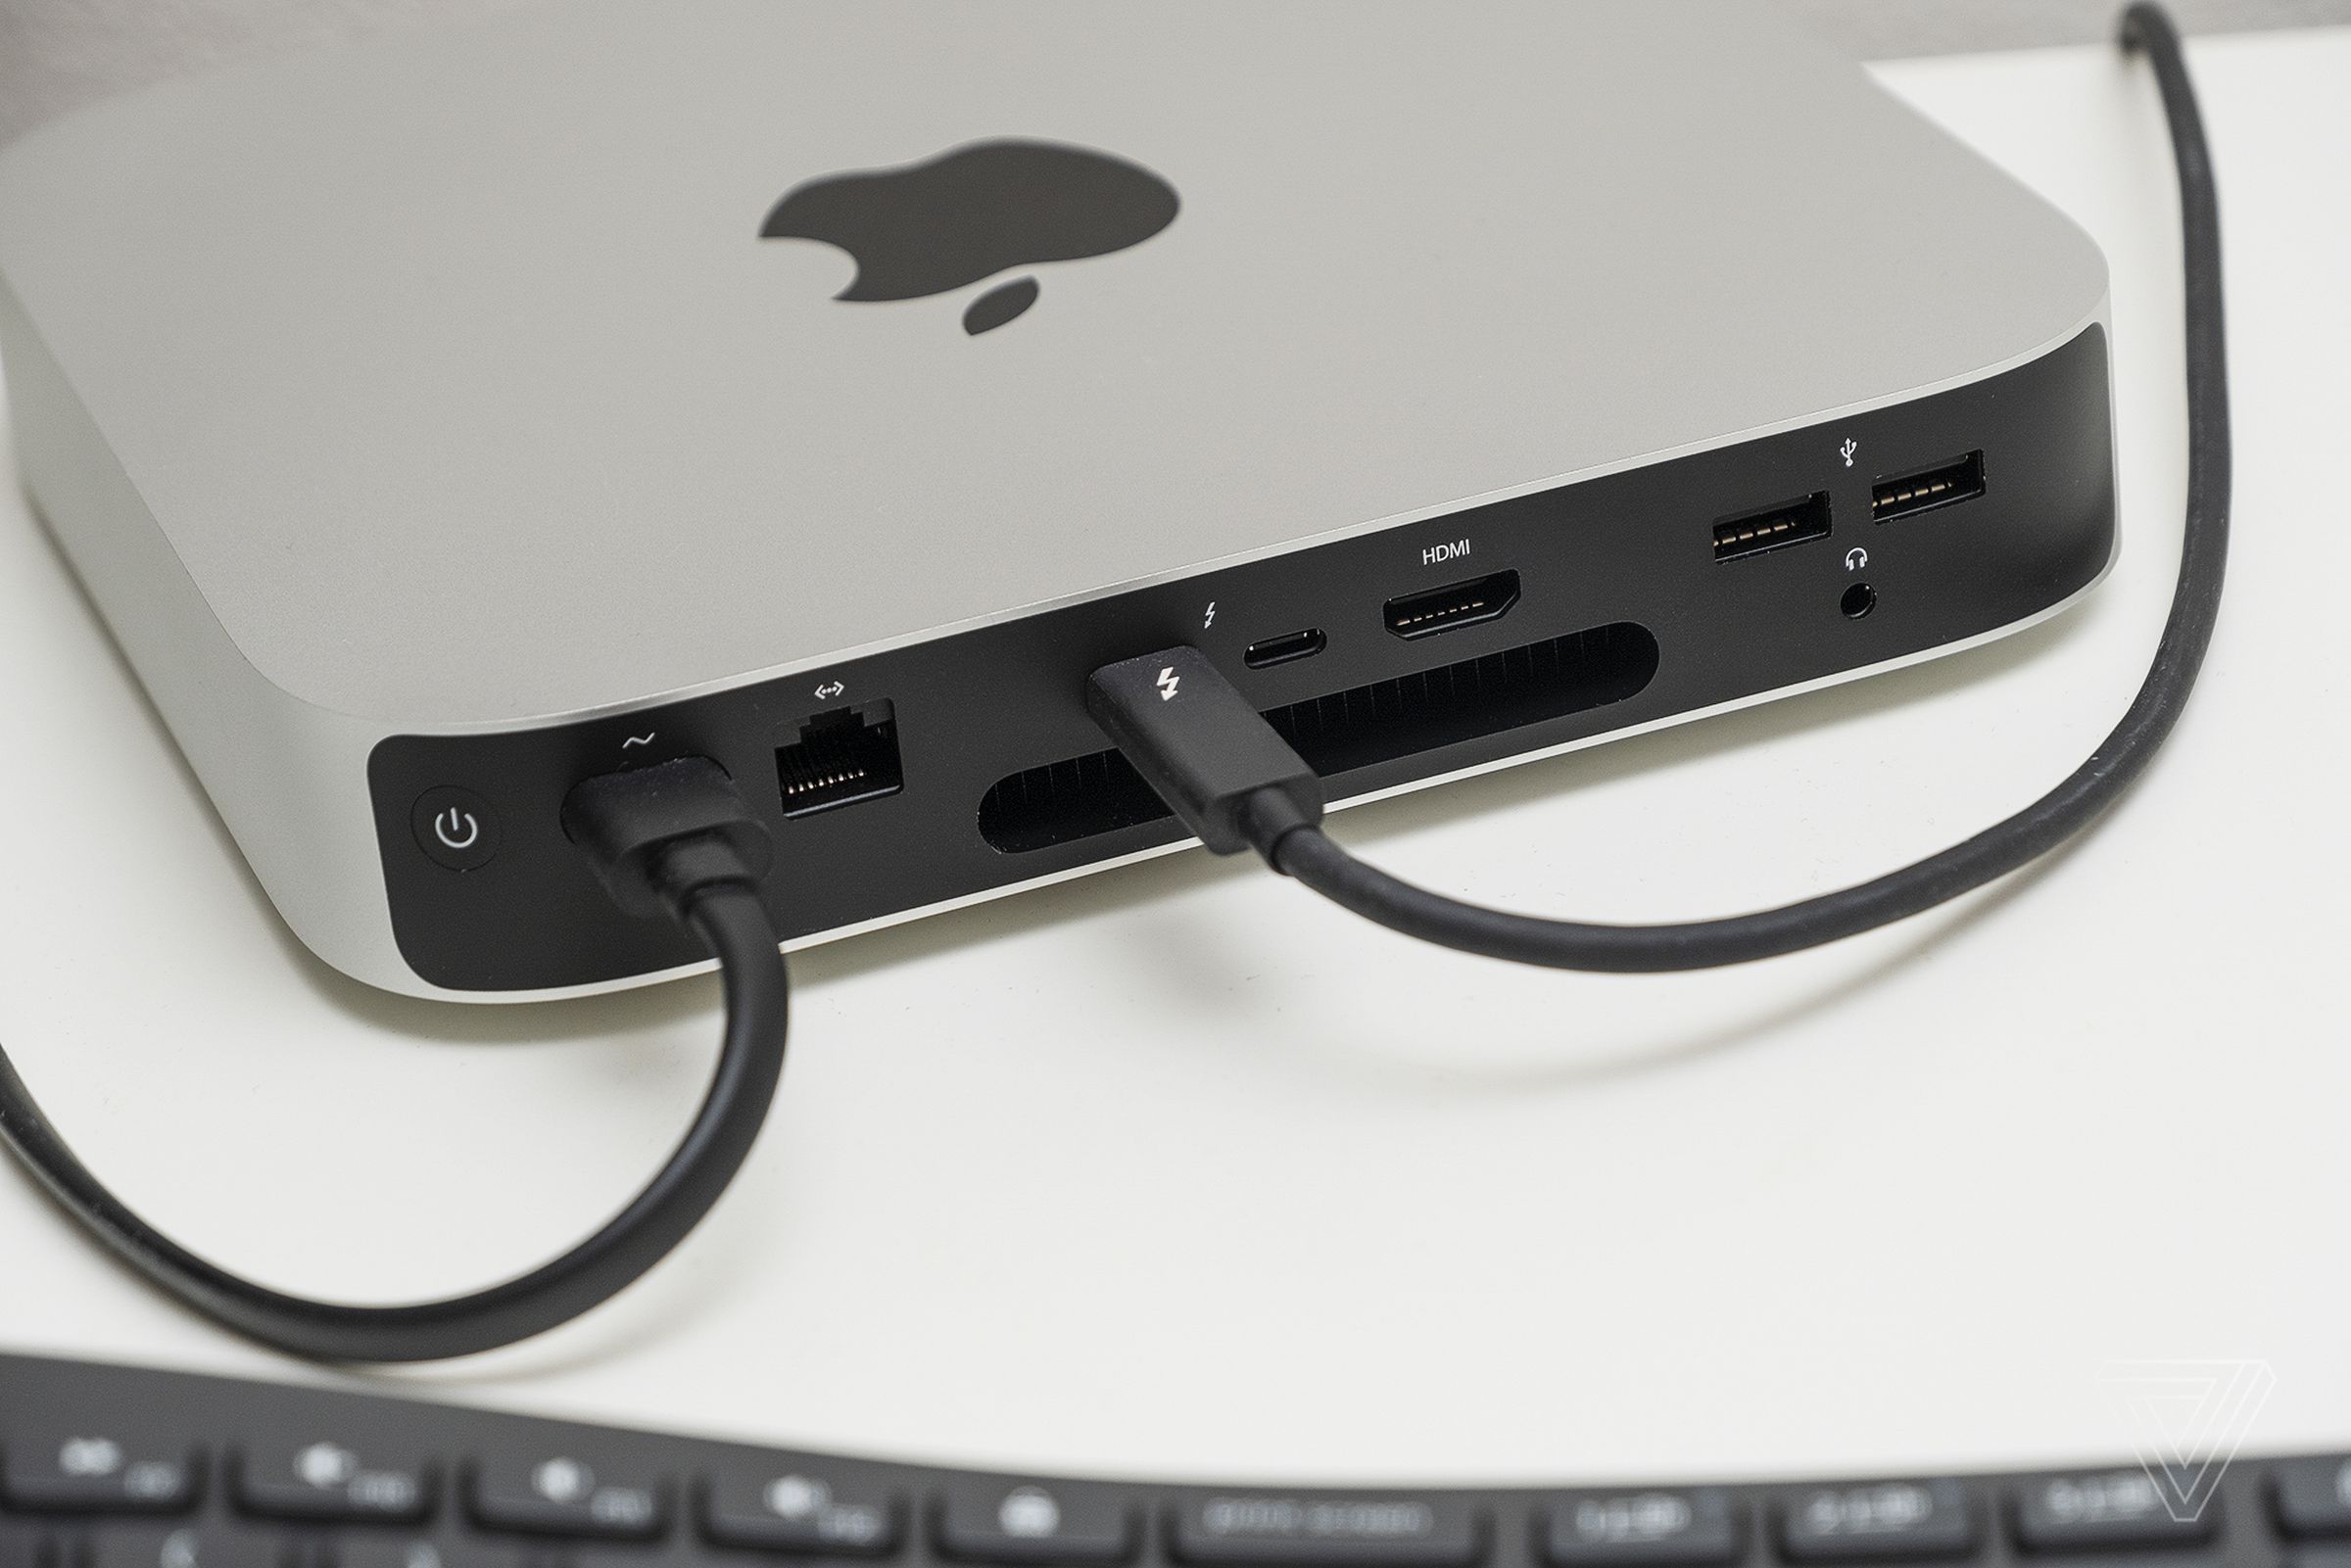 The M1 Mac mini loses two USB-C ports compared to the Intel model, which has four.